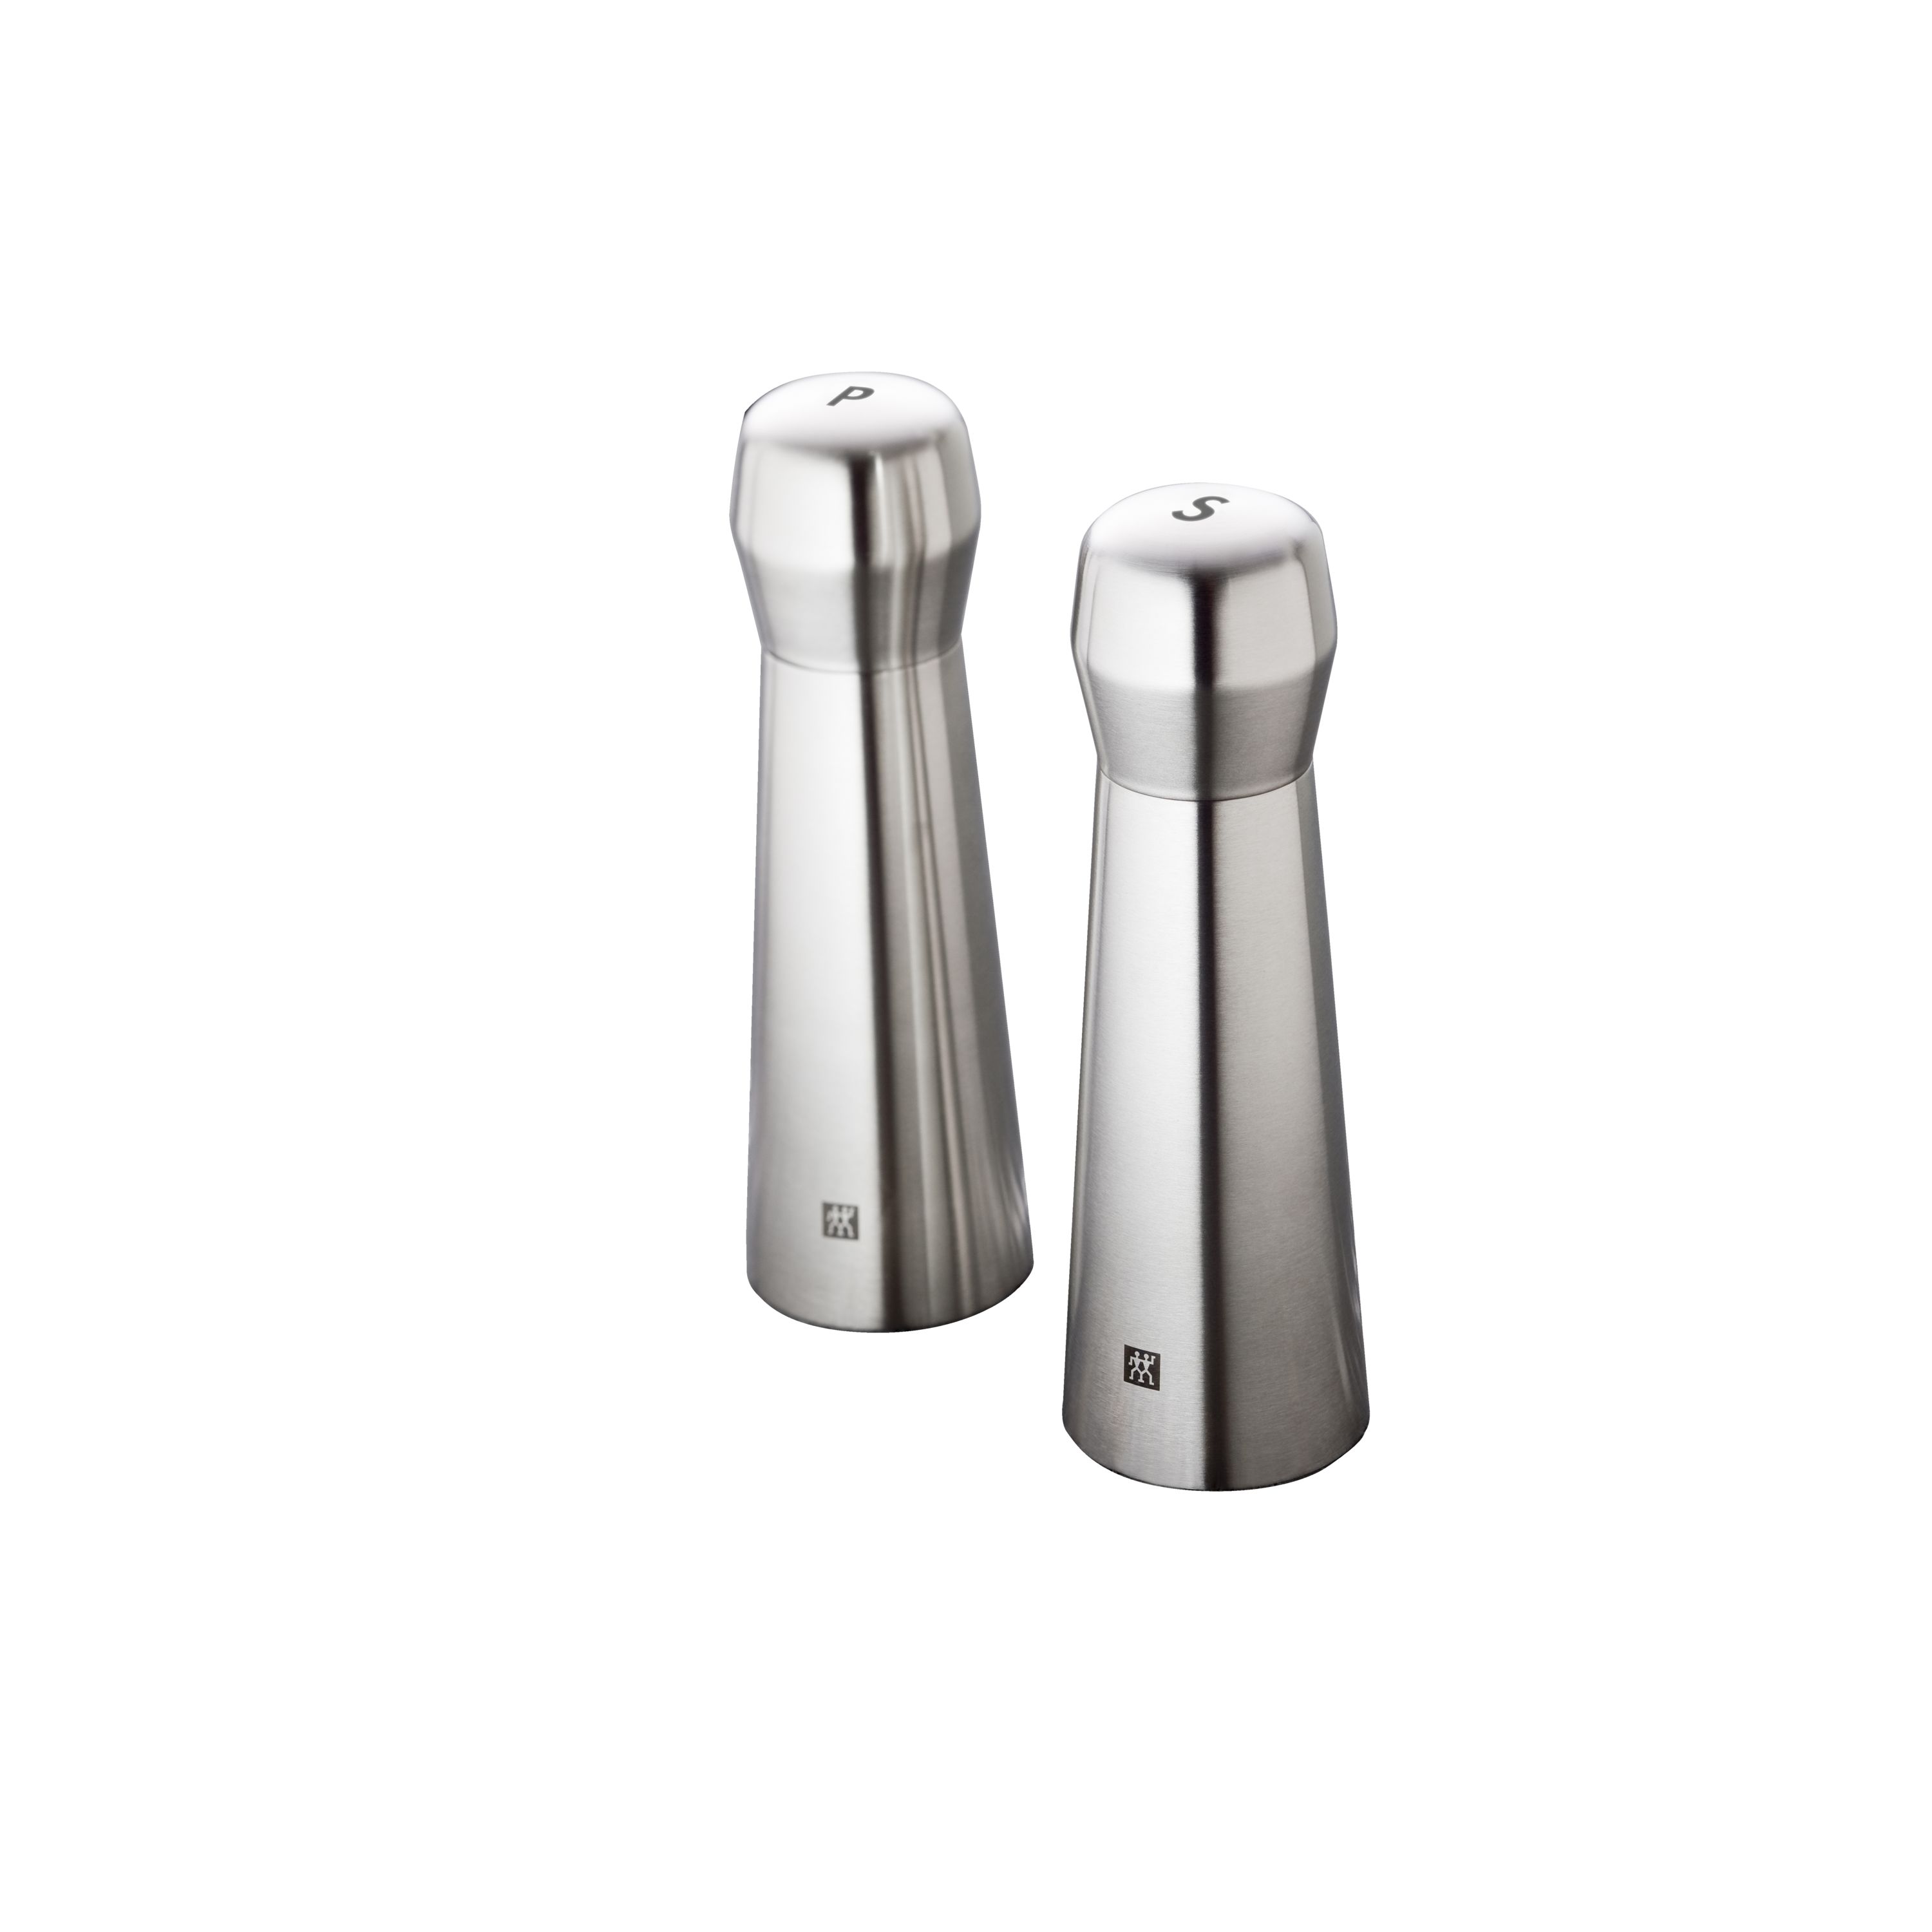 ZWILLING 39500 025 0 Spices Set of 2 Salt and Pepper Grinders, Stainless  Steel, Matt Stainless Steel